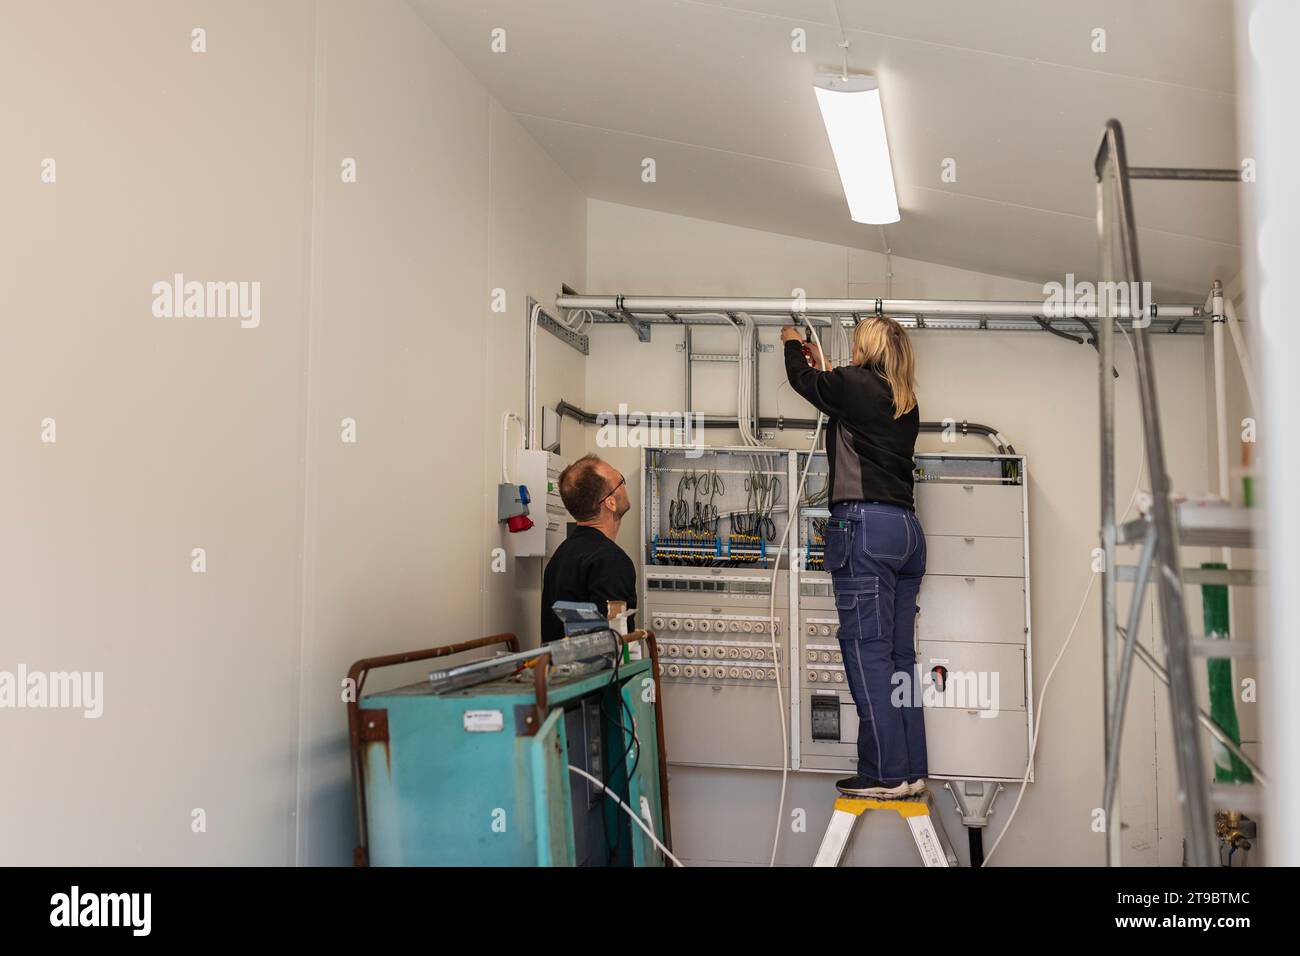 Female electrician installing cables standing by male coworker in meter room Stock Photo